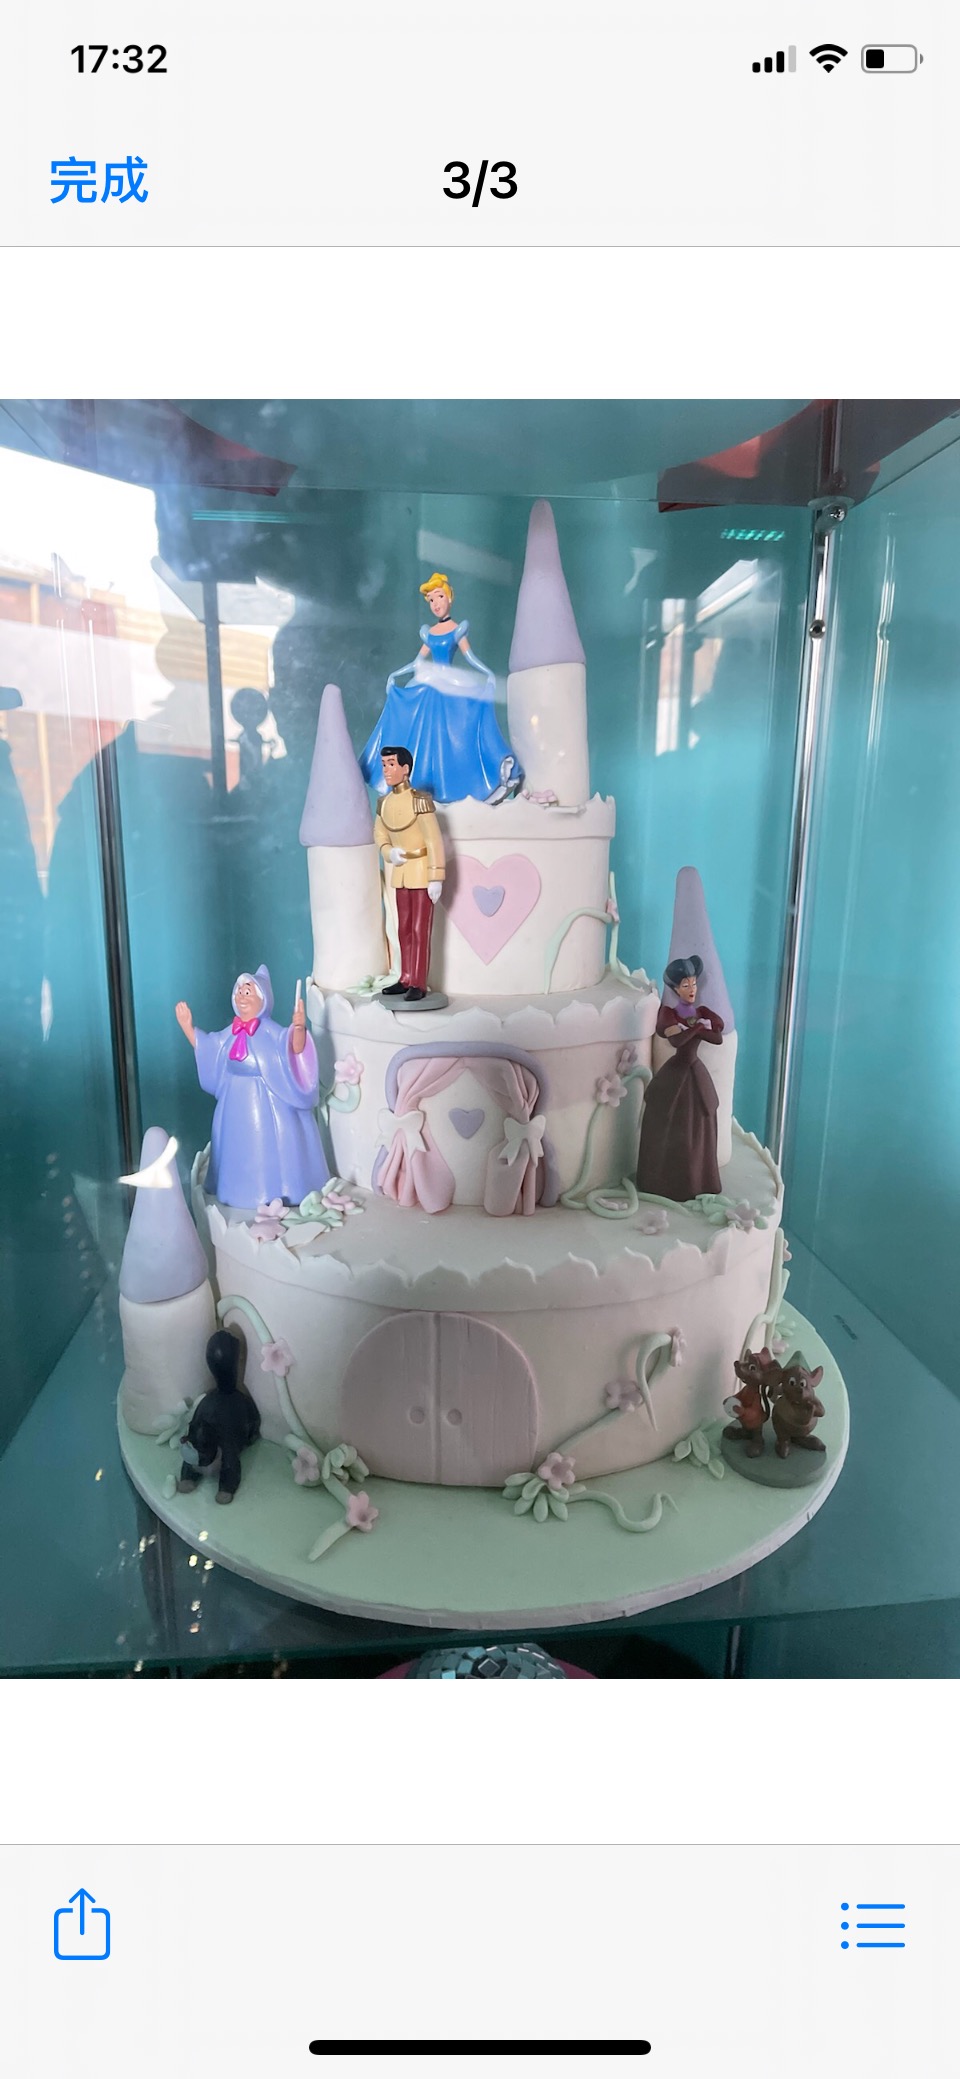 12+ Coolest Castle Cake Ideas - Awesome Homemade Castle Cake Designs!